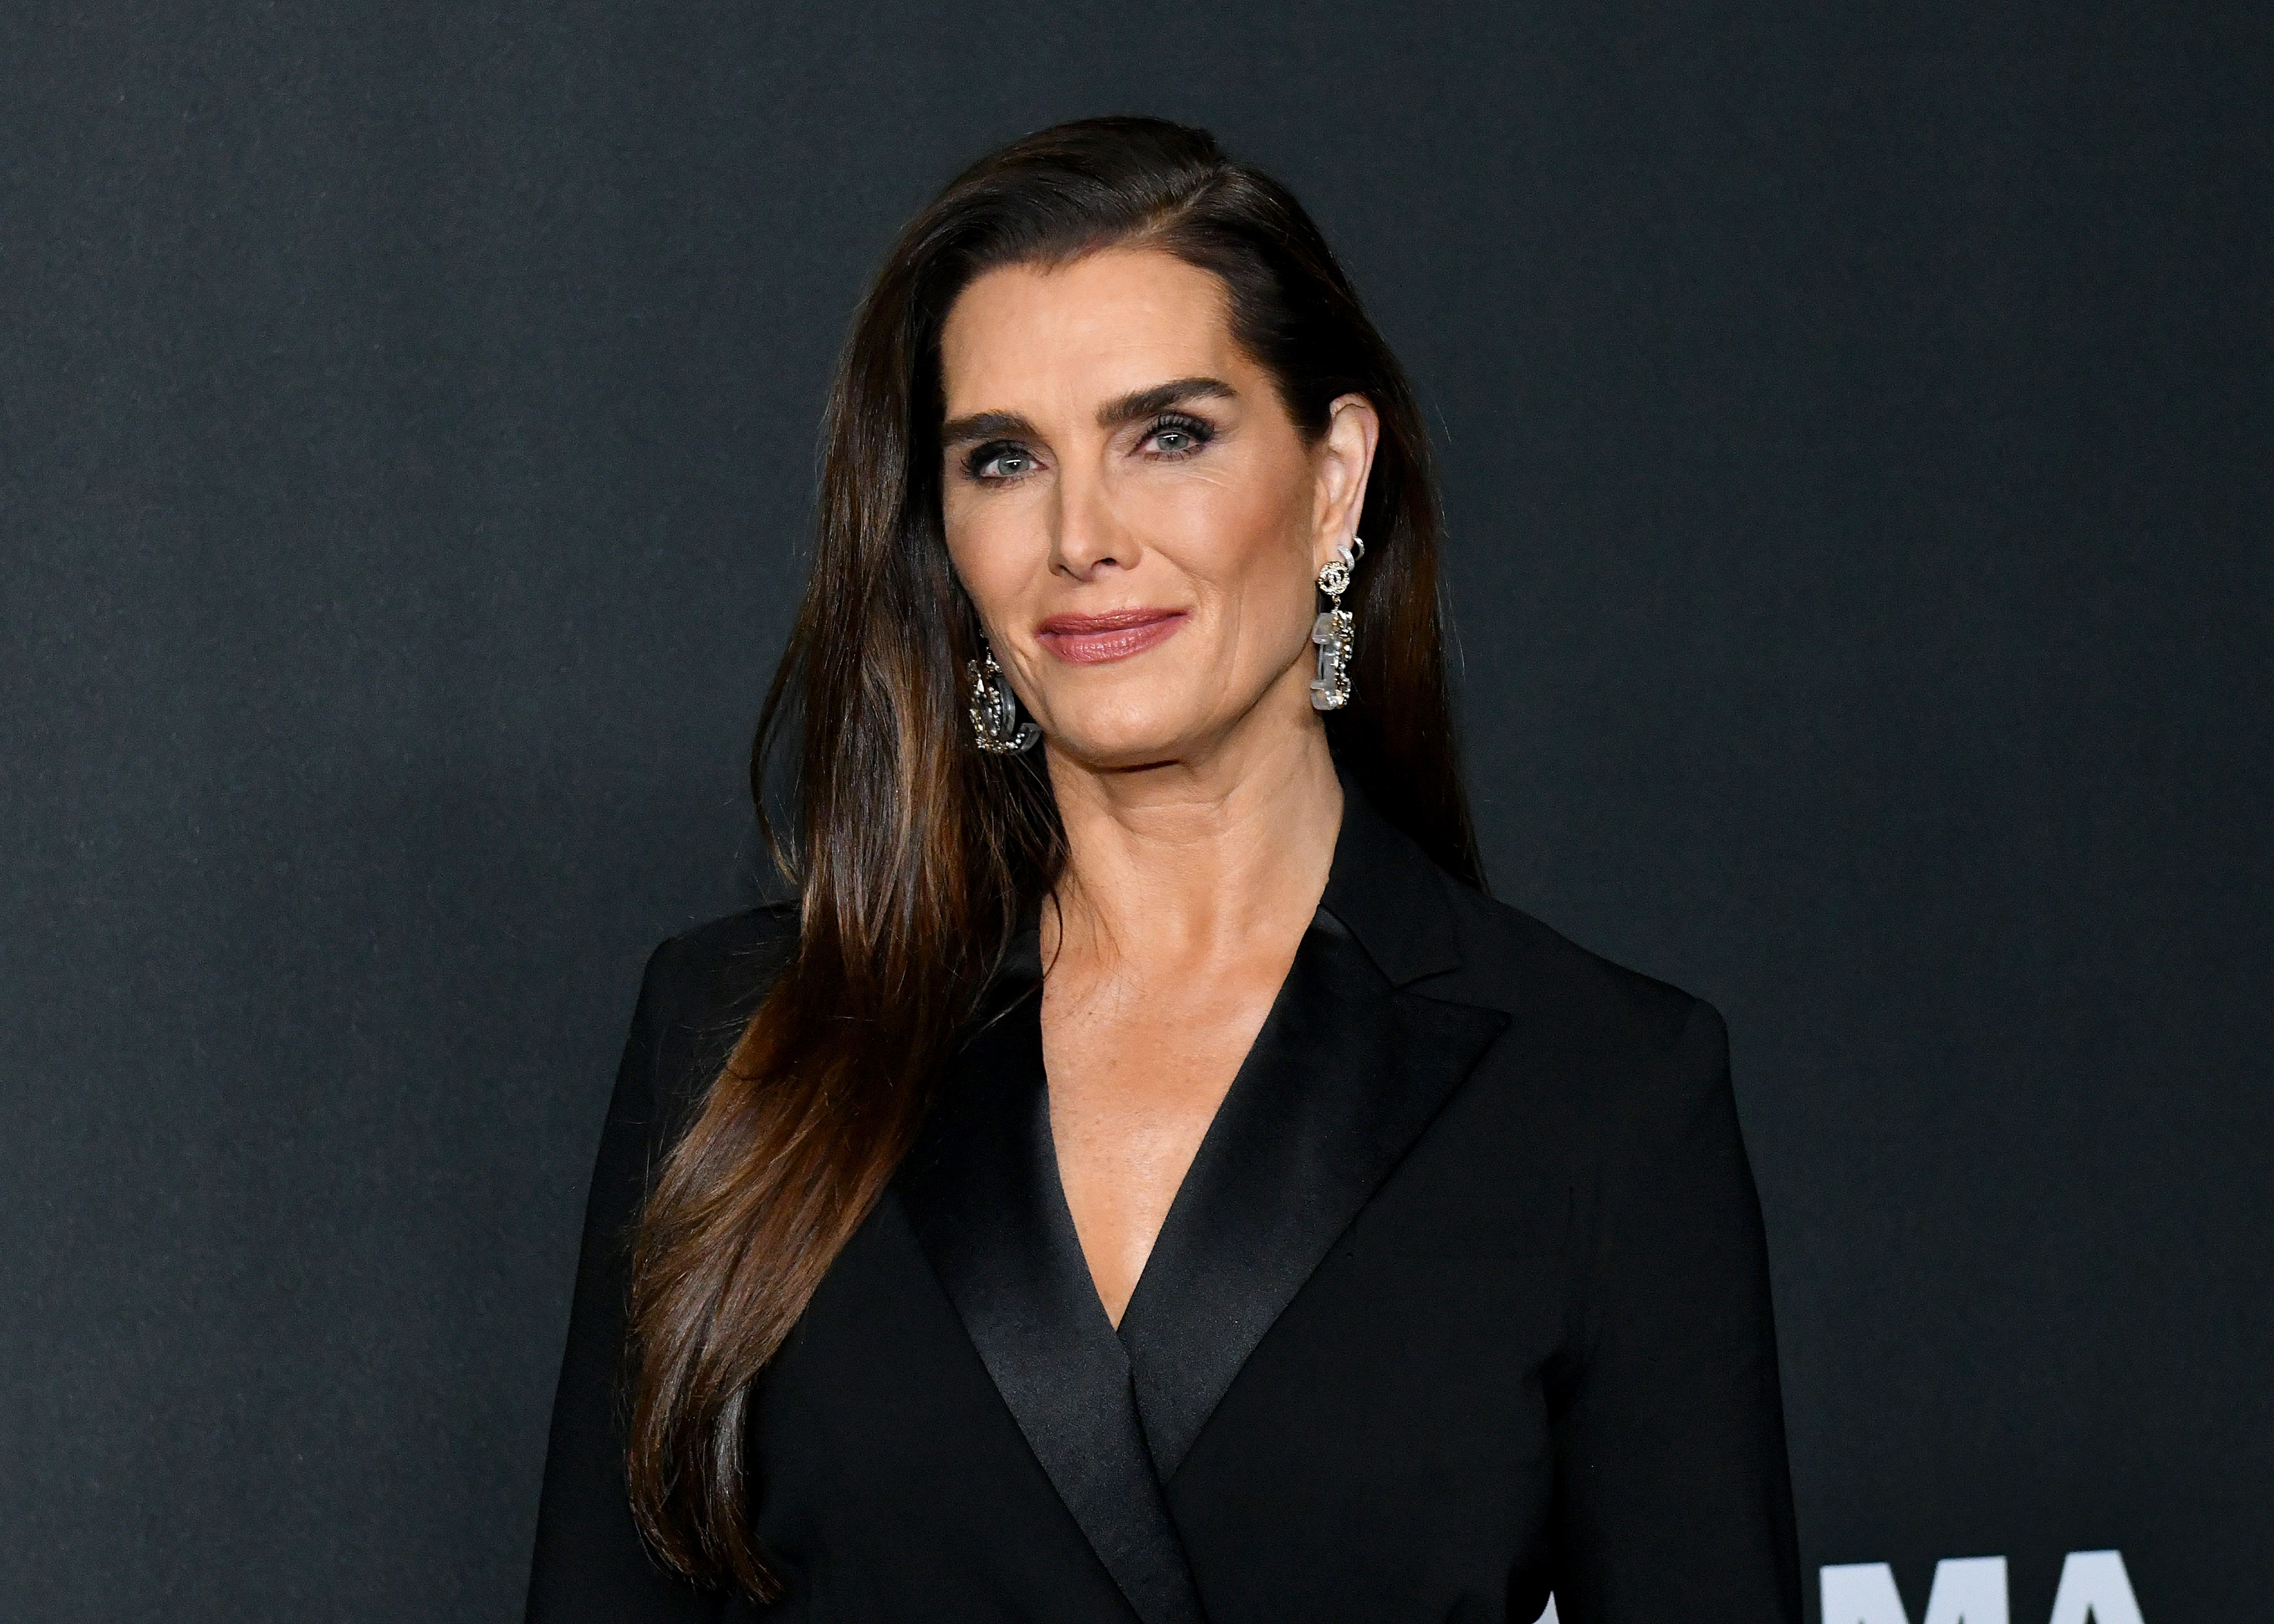 Brooke Shields at MoMA's Twelfth Annual Film Benefit Presented By CHANEL Honoring Laura Dern on November 12, 2019 | Photo: Getty Images